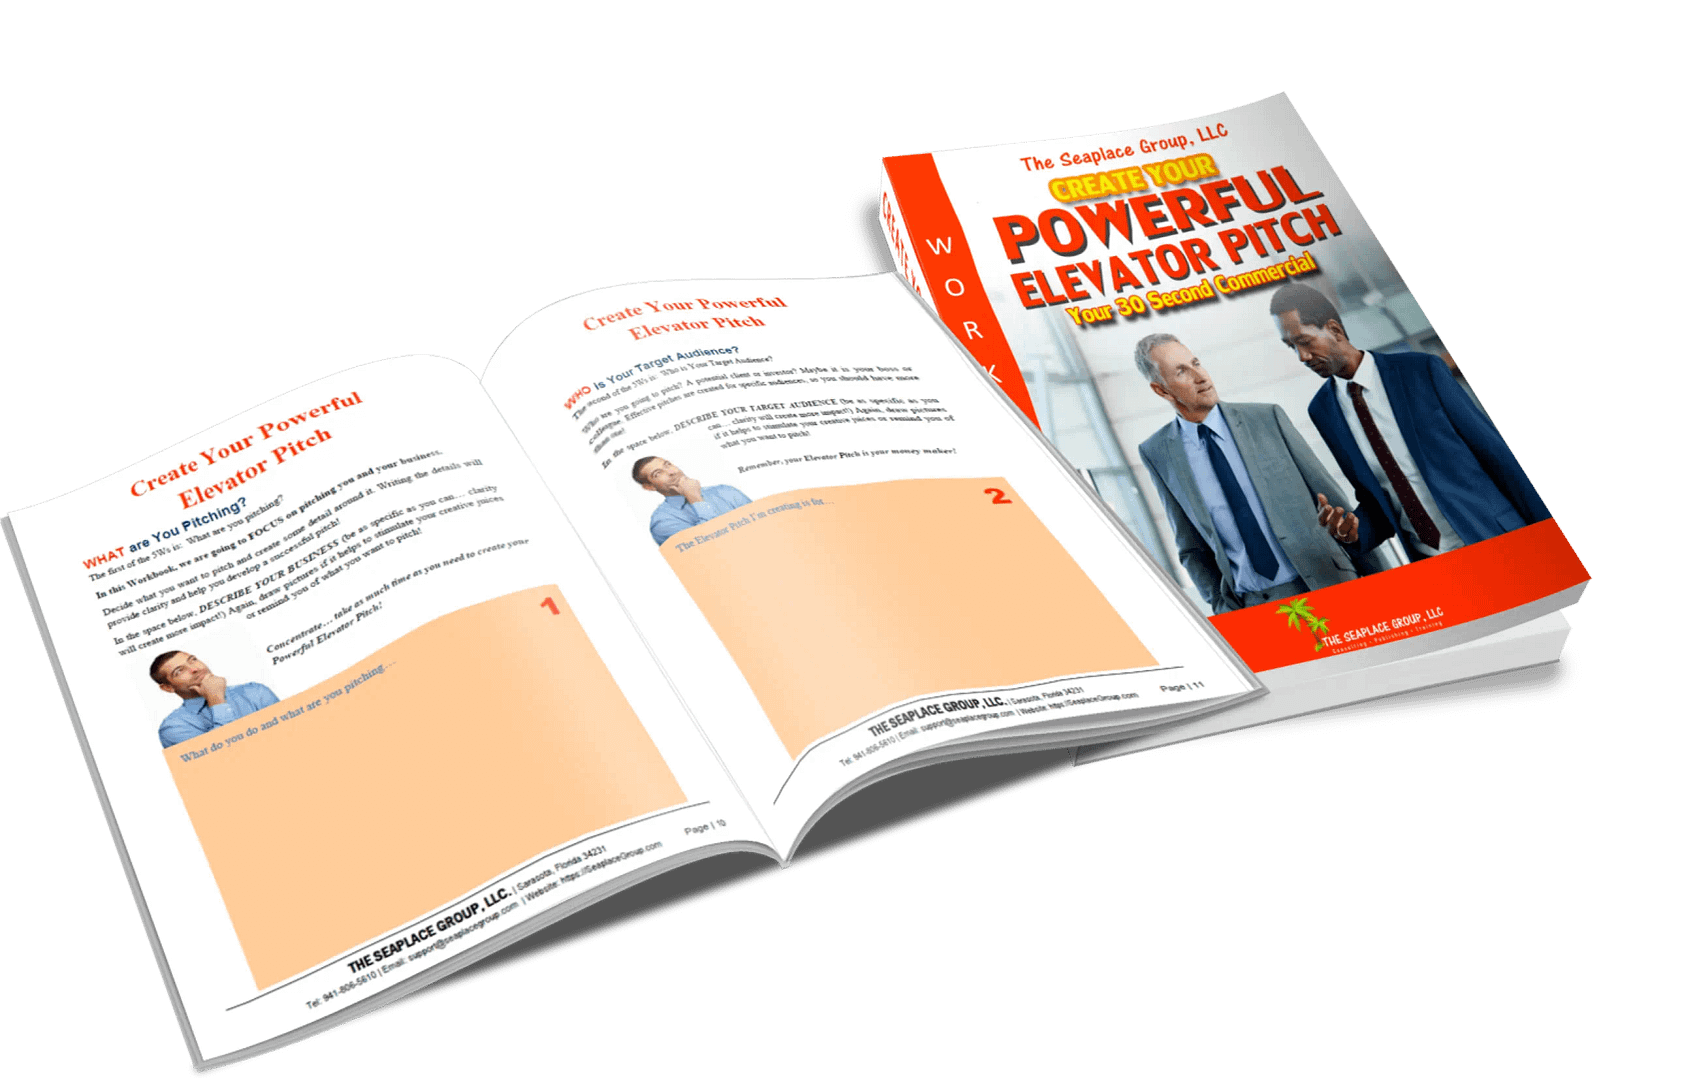 Create Your Powerful Elevator PitchThe purpose of this interactive Workbook is to provide a foundation of valuable information and a step-by-step blueprint in order to help you create your own uniquely powerful Elevator Pitch – Your 30 Second Commercial. Your Elevator Pitch – Your 30 Second Commercial will be a brief, persuasive speech that you will use to spark interest in what you and your organization does. You can also use your Elevator Pitch – Your 30 Commercial to create interest in a project, idea, or product – or in yourself.